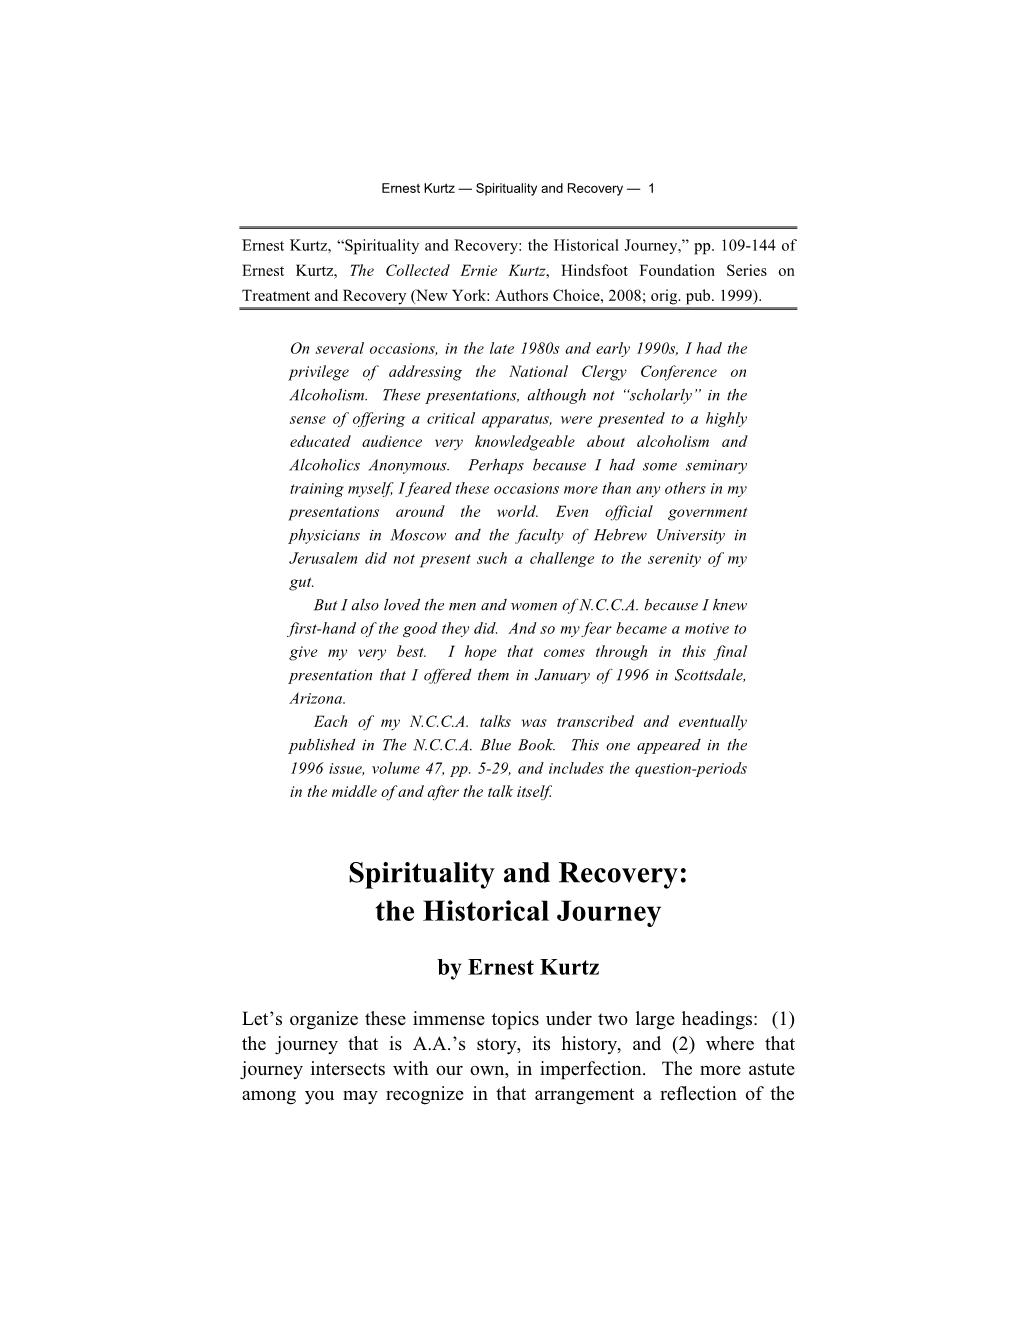 Spirituality and Recovery: the Historical Journey,” Pp